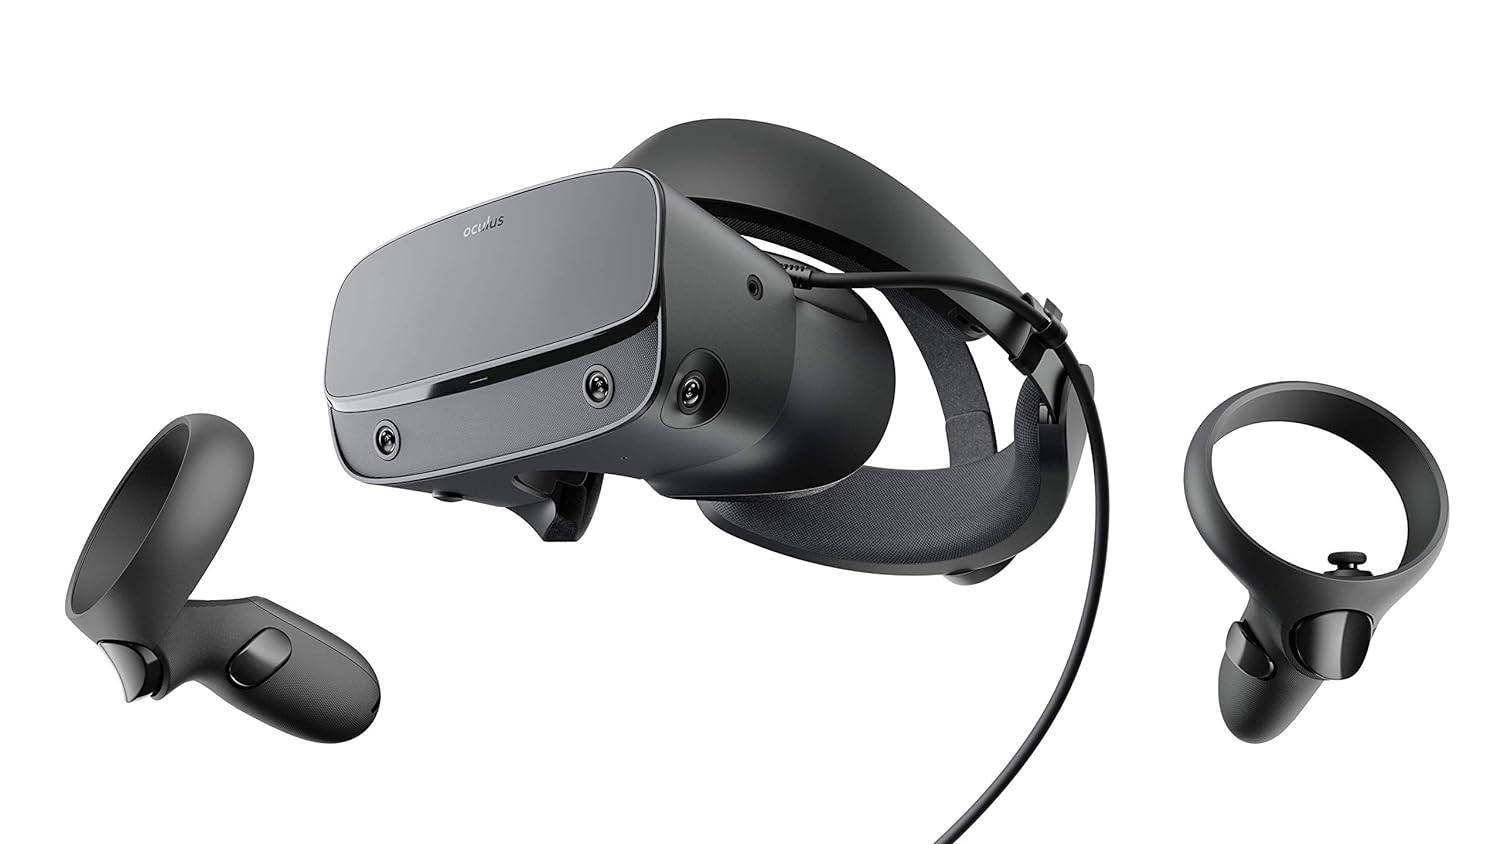 Oculus Rift S PCPowered VR Gaming Headset